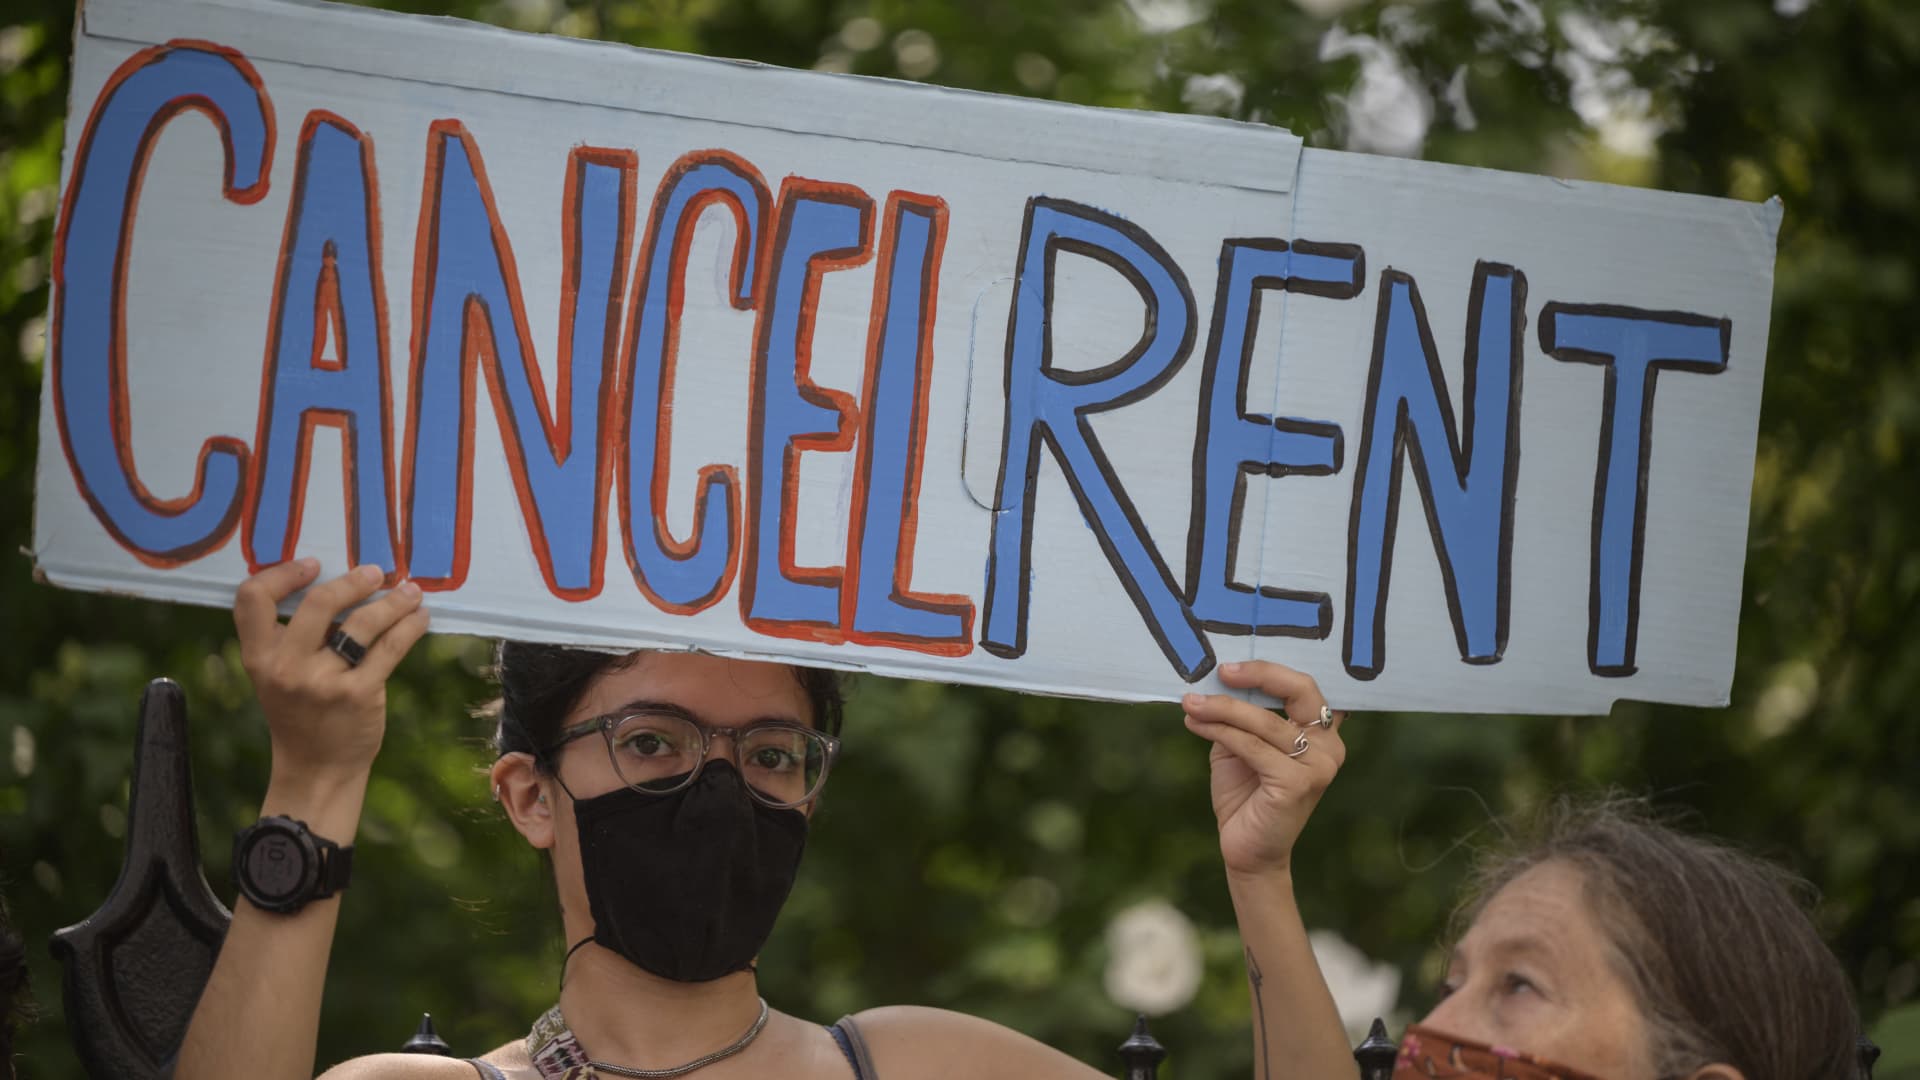 Demonstrators attend a rally calling for an extension of the state's eviction ban until 2022 and the cancellation of rent, in lower Manhattan, New York city on August 11, 2021.